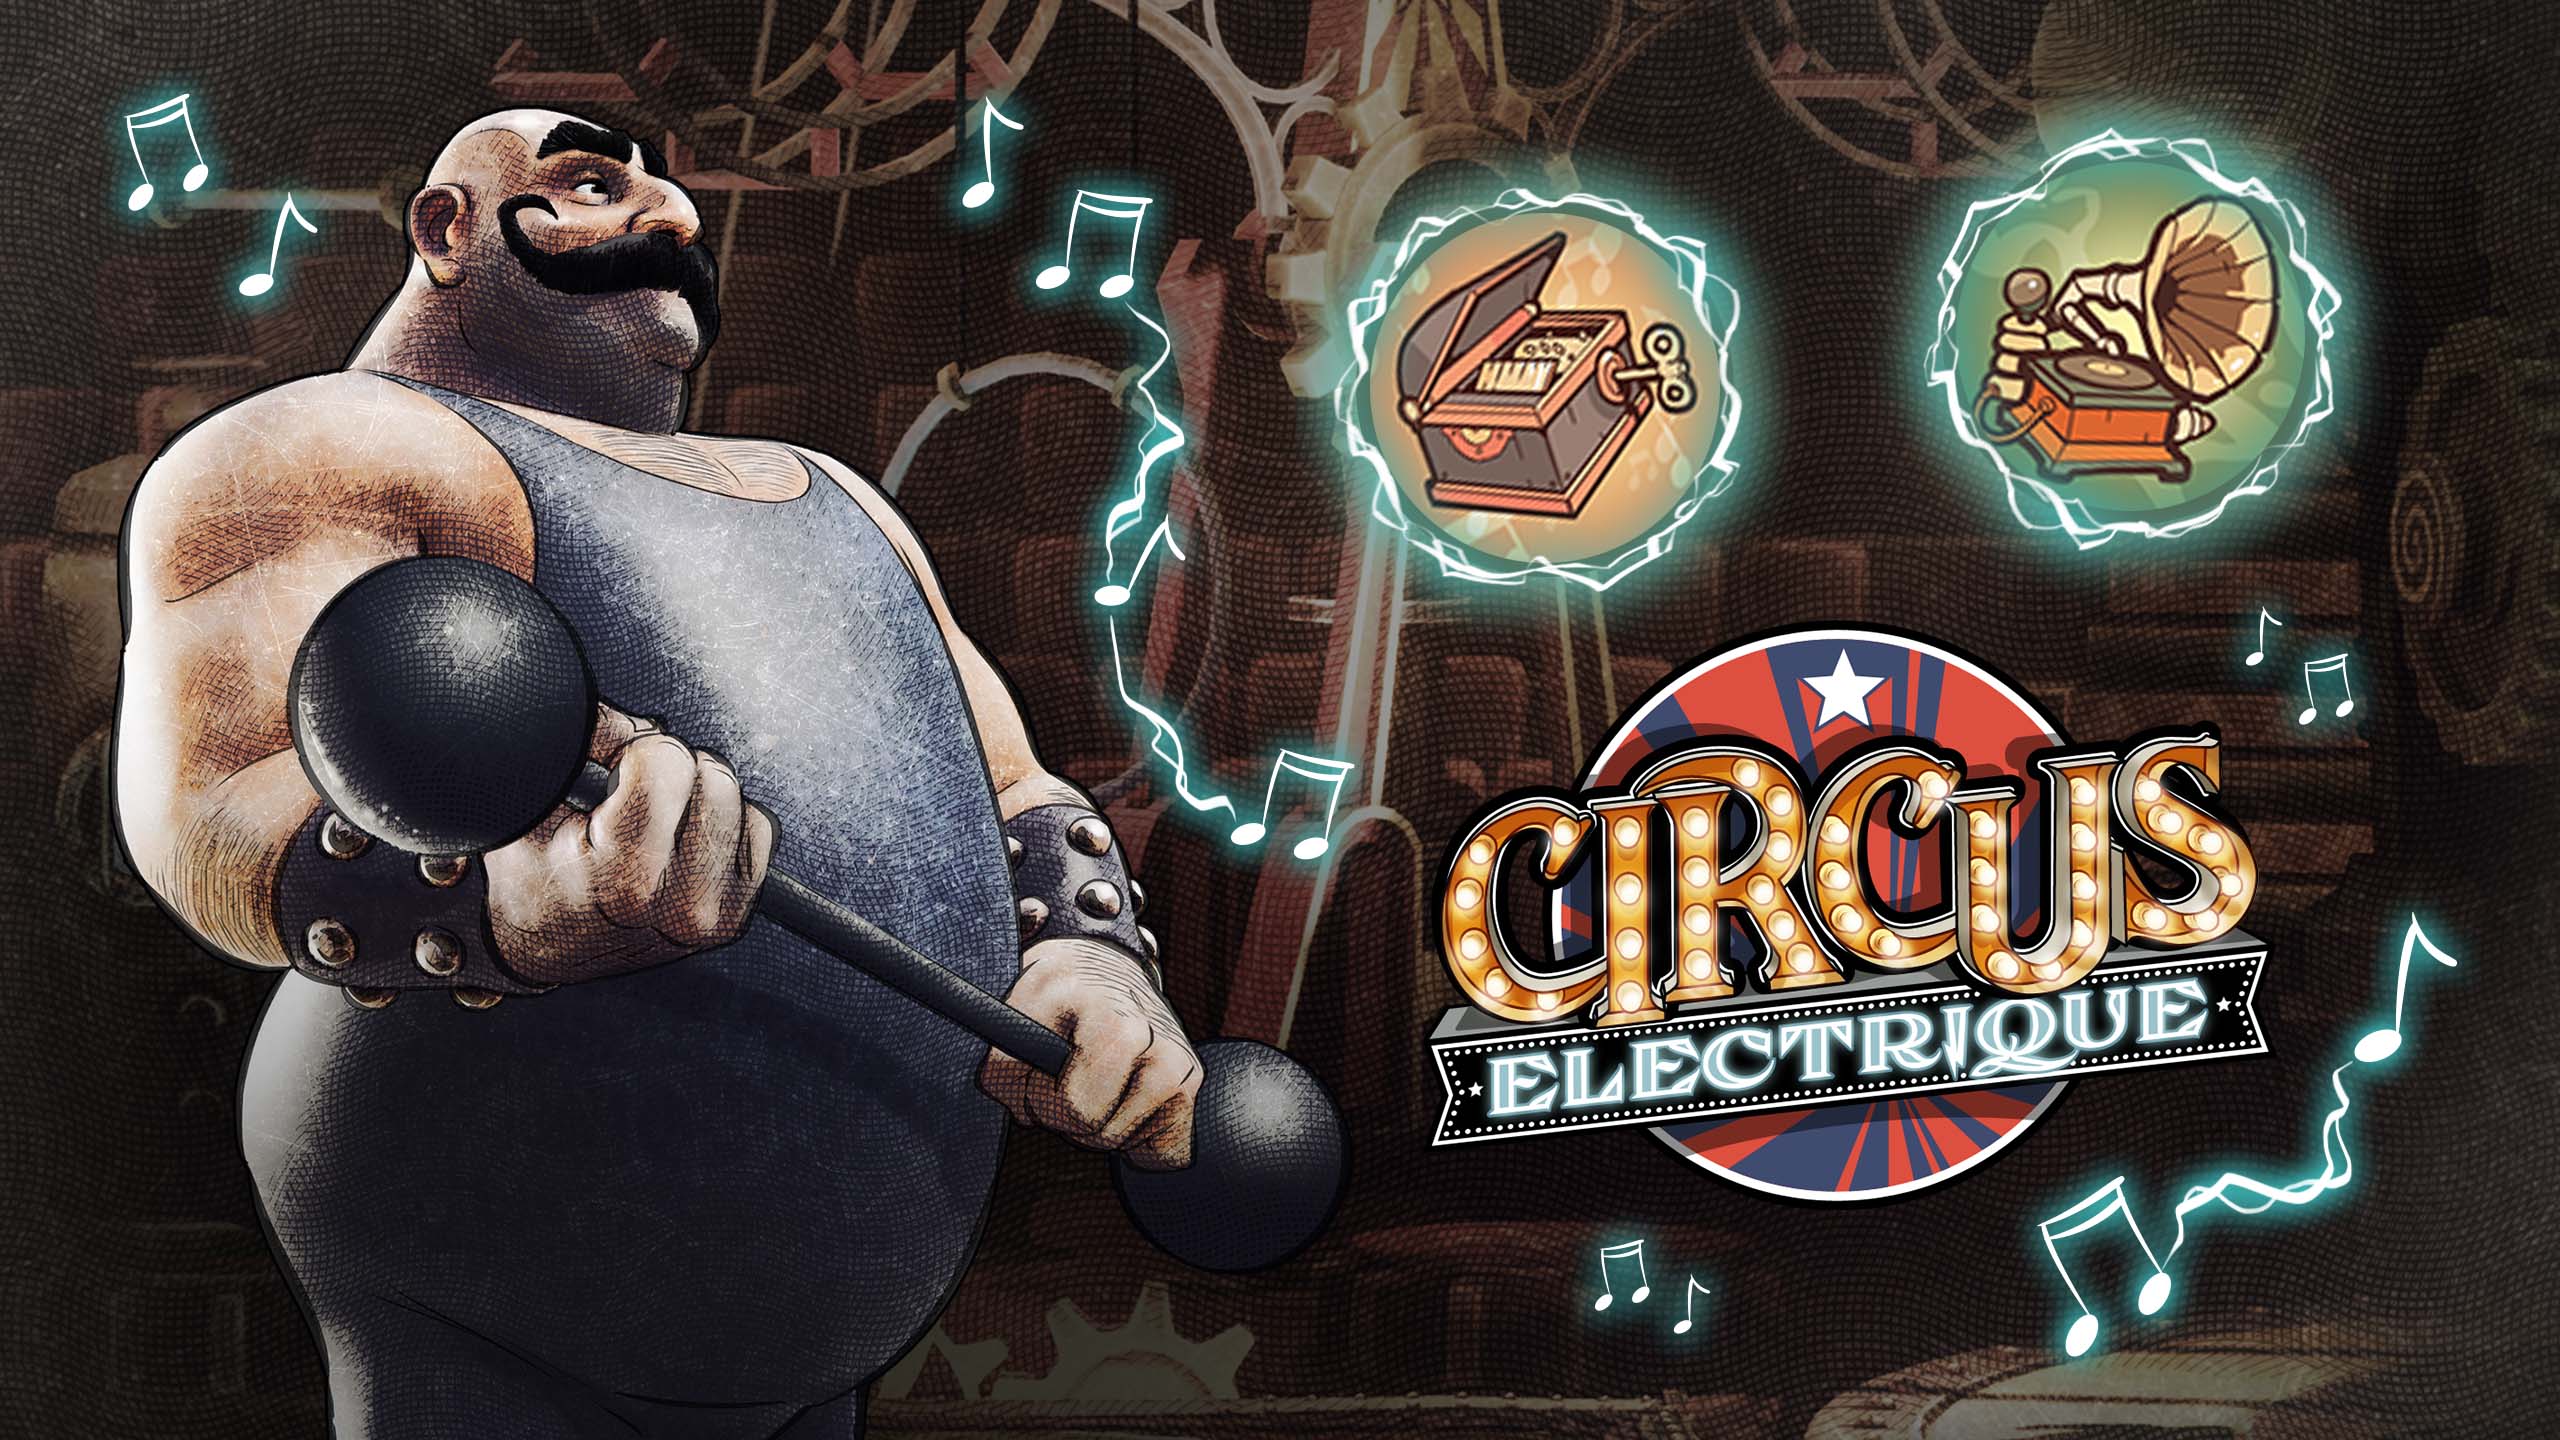 Circus Electrique for mac download free